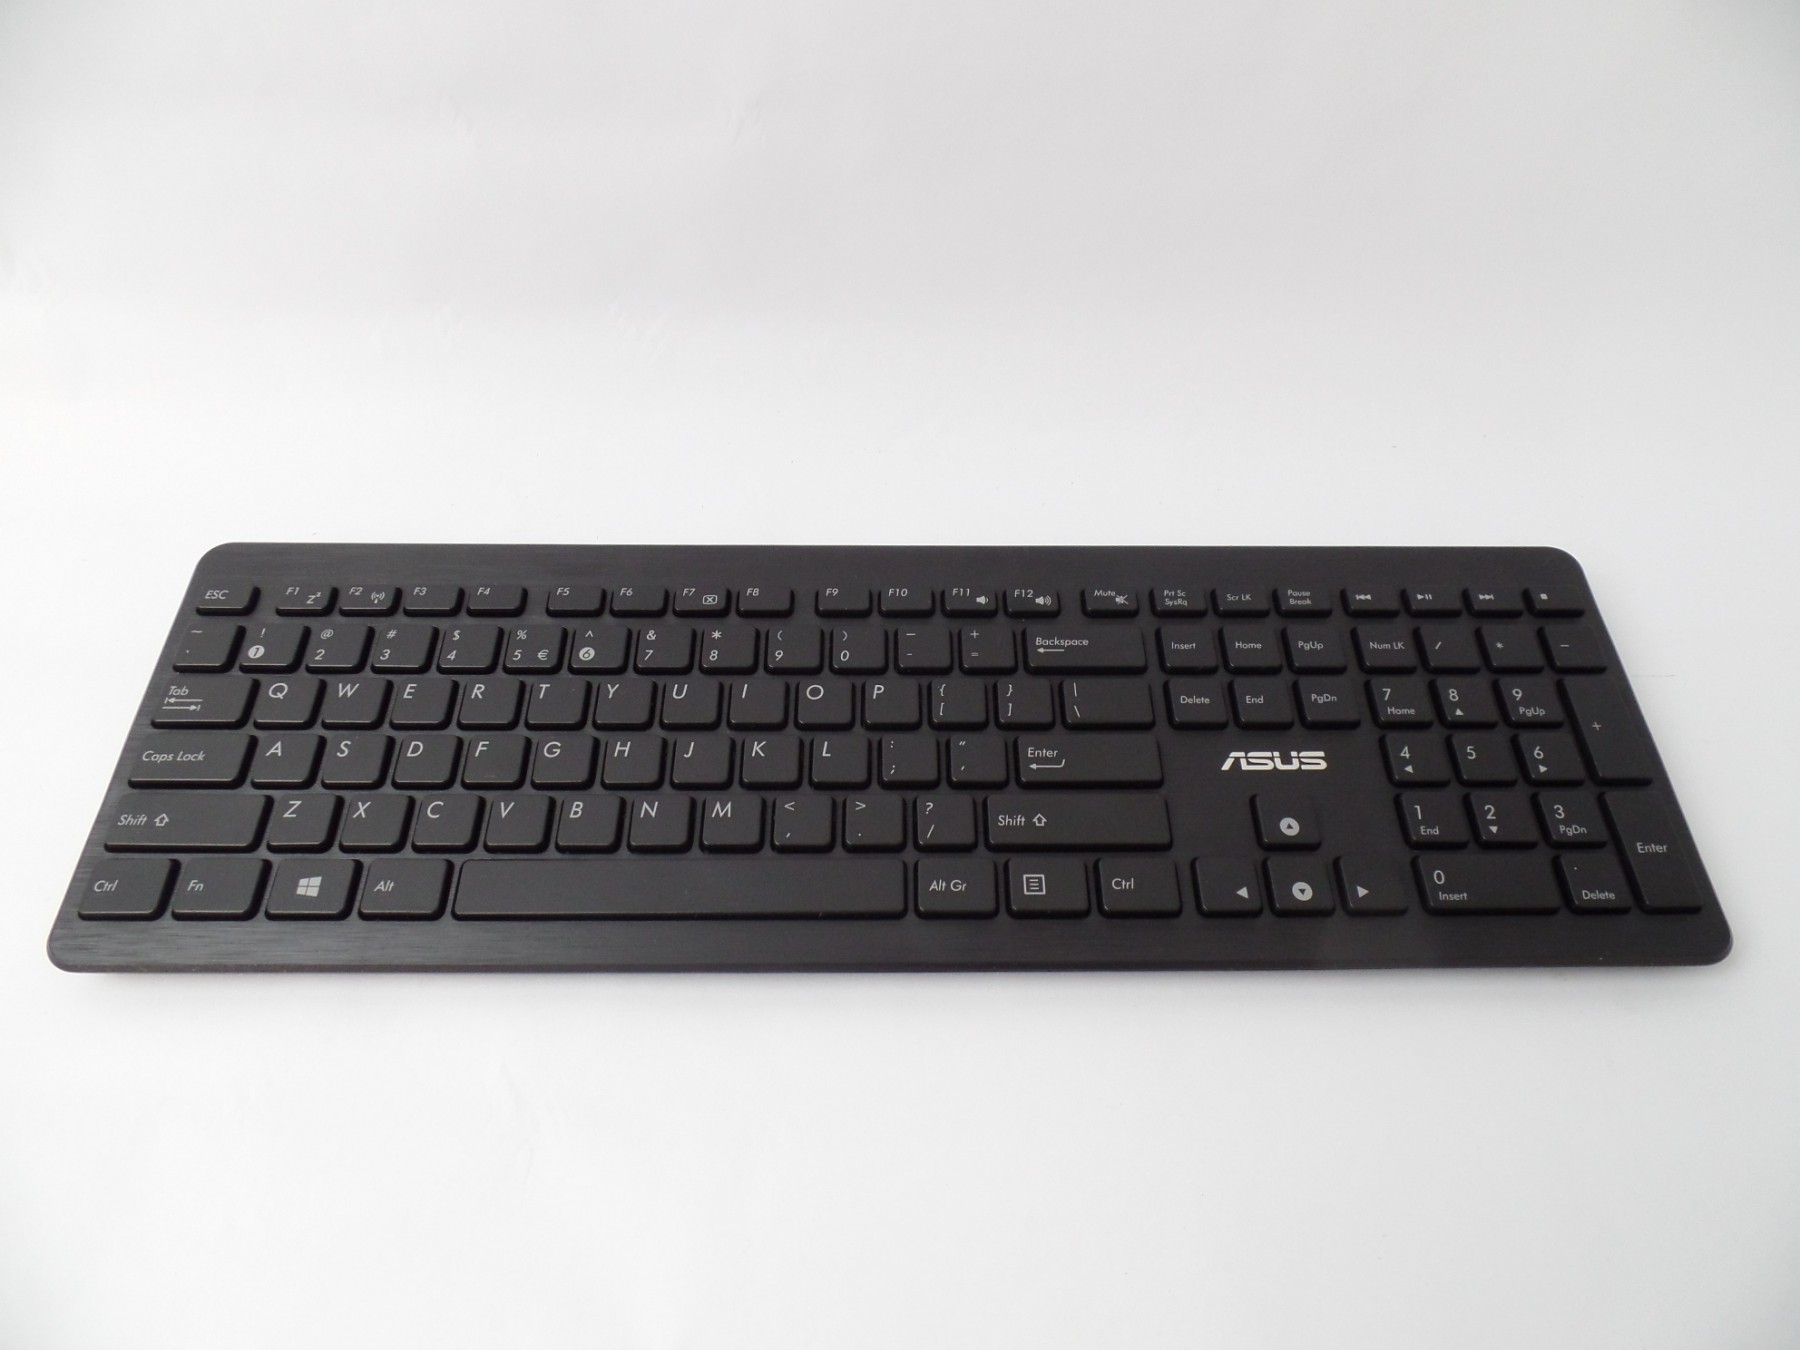 Asus Ak1l Wireless Keyboard Am1l Mouse With Usb Receiver